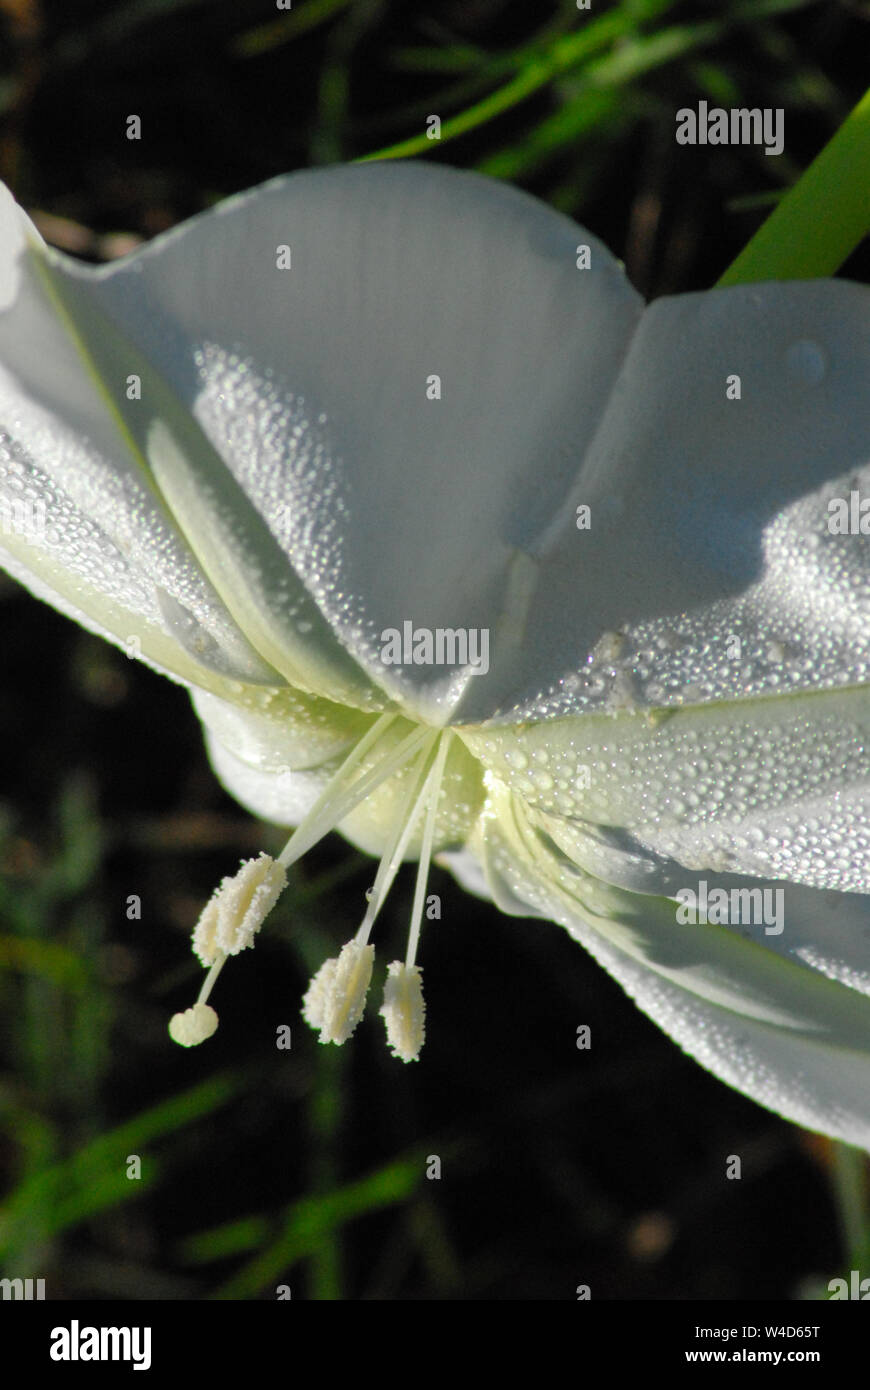 A beautiful image of a large white Moonflower with white stamens.  Note the dew droplets.  Photographed in Florida, USA. Stock Photo